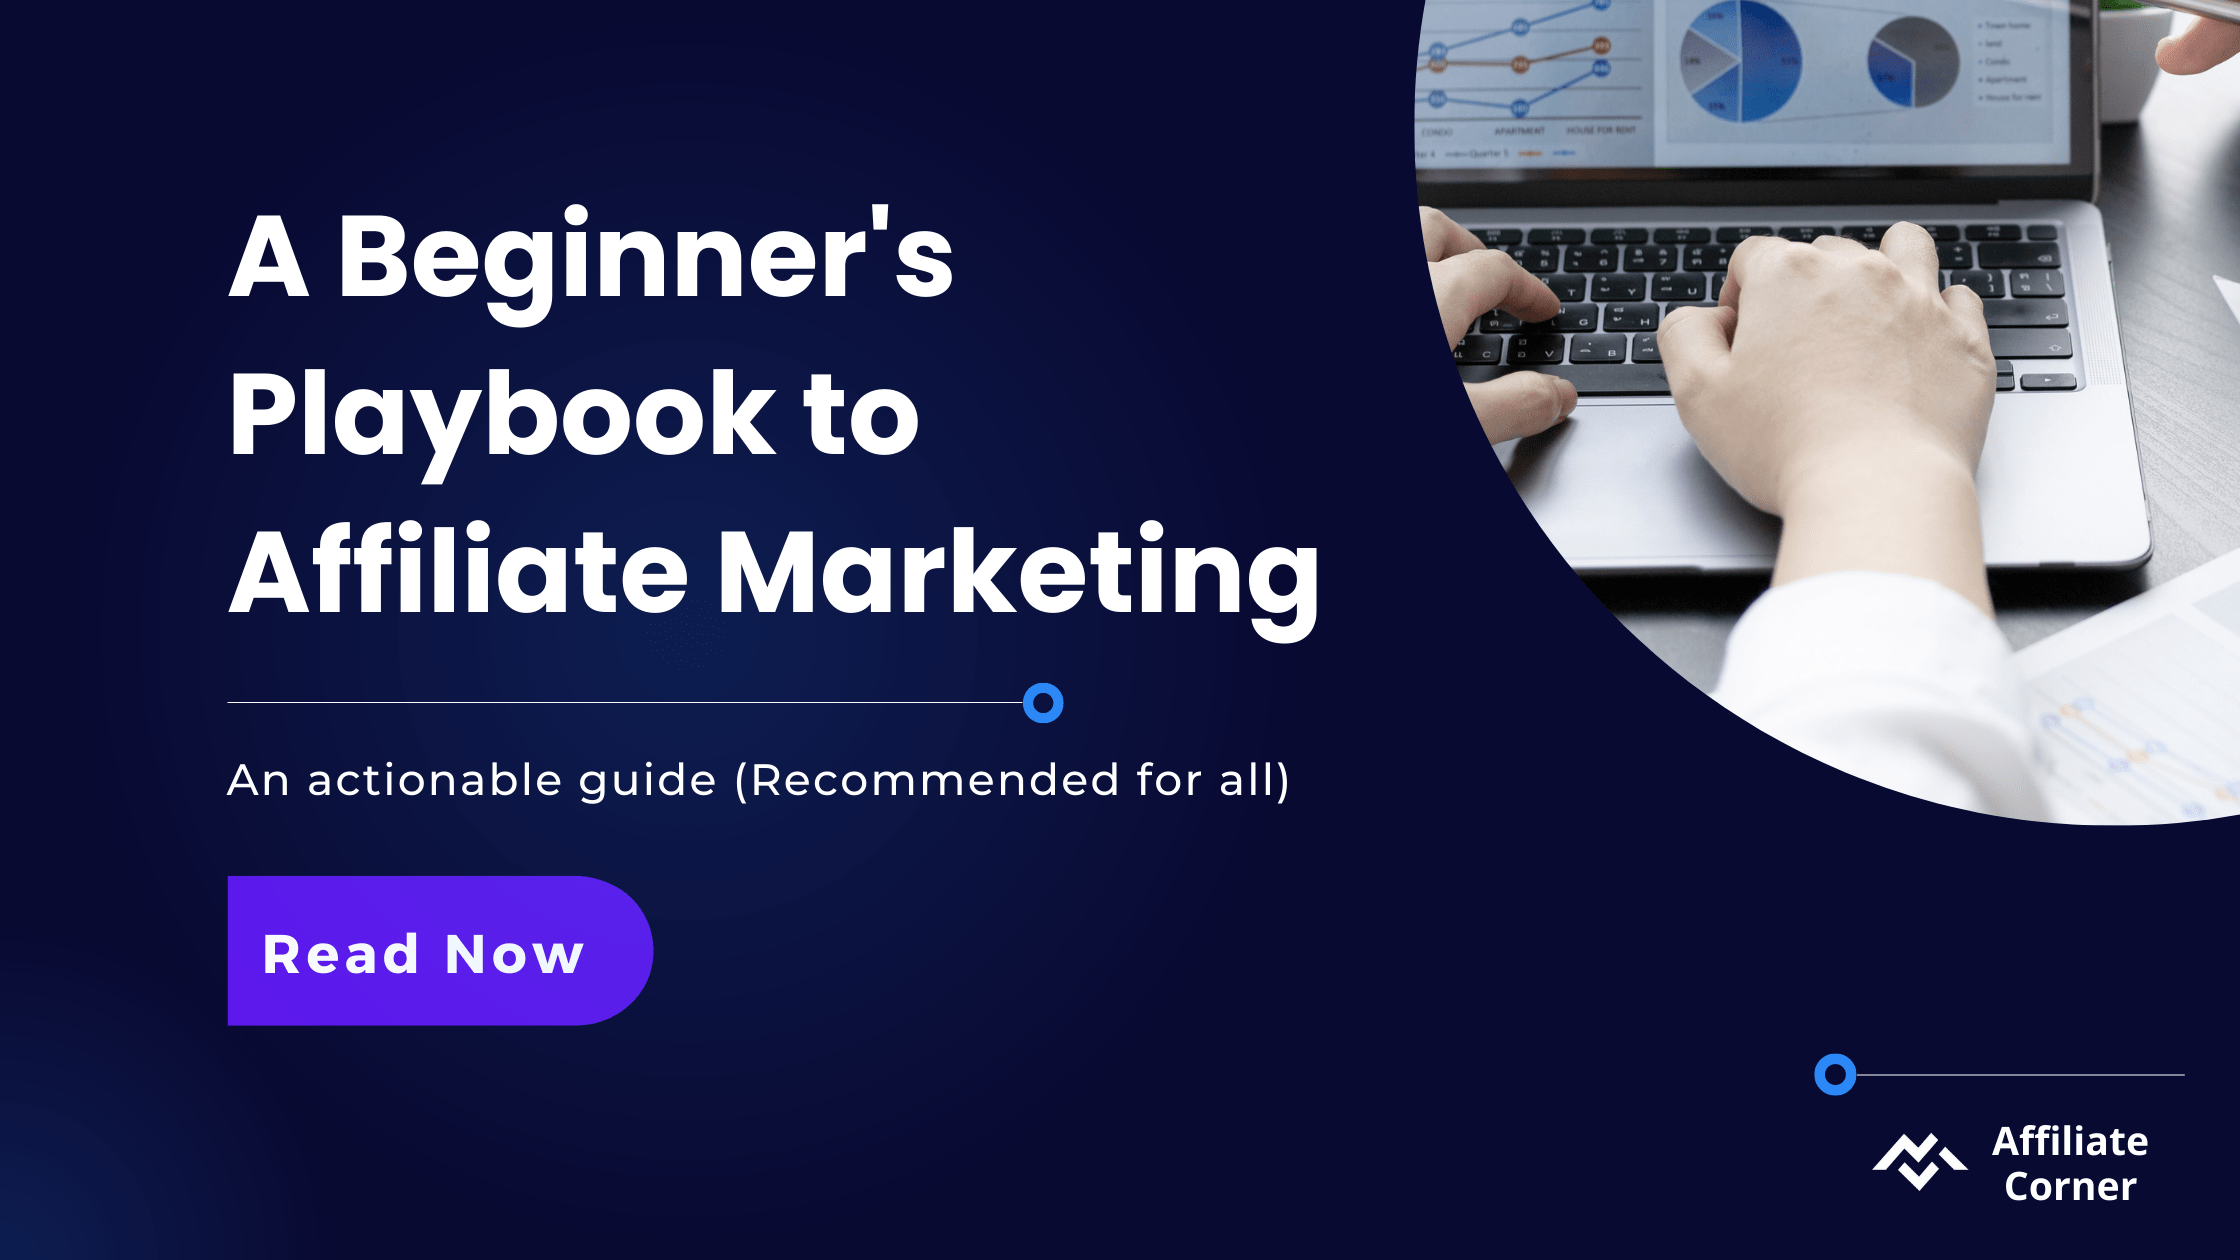 A Beginner's Playbook to Affiliate Marketing